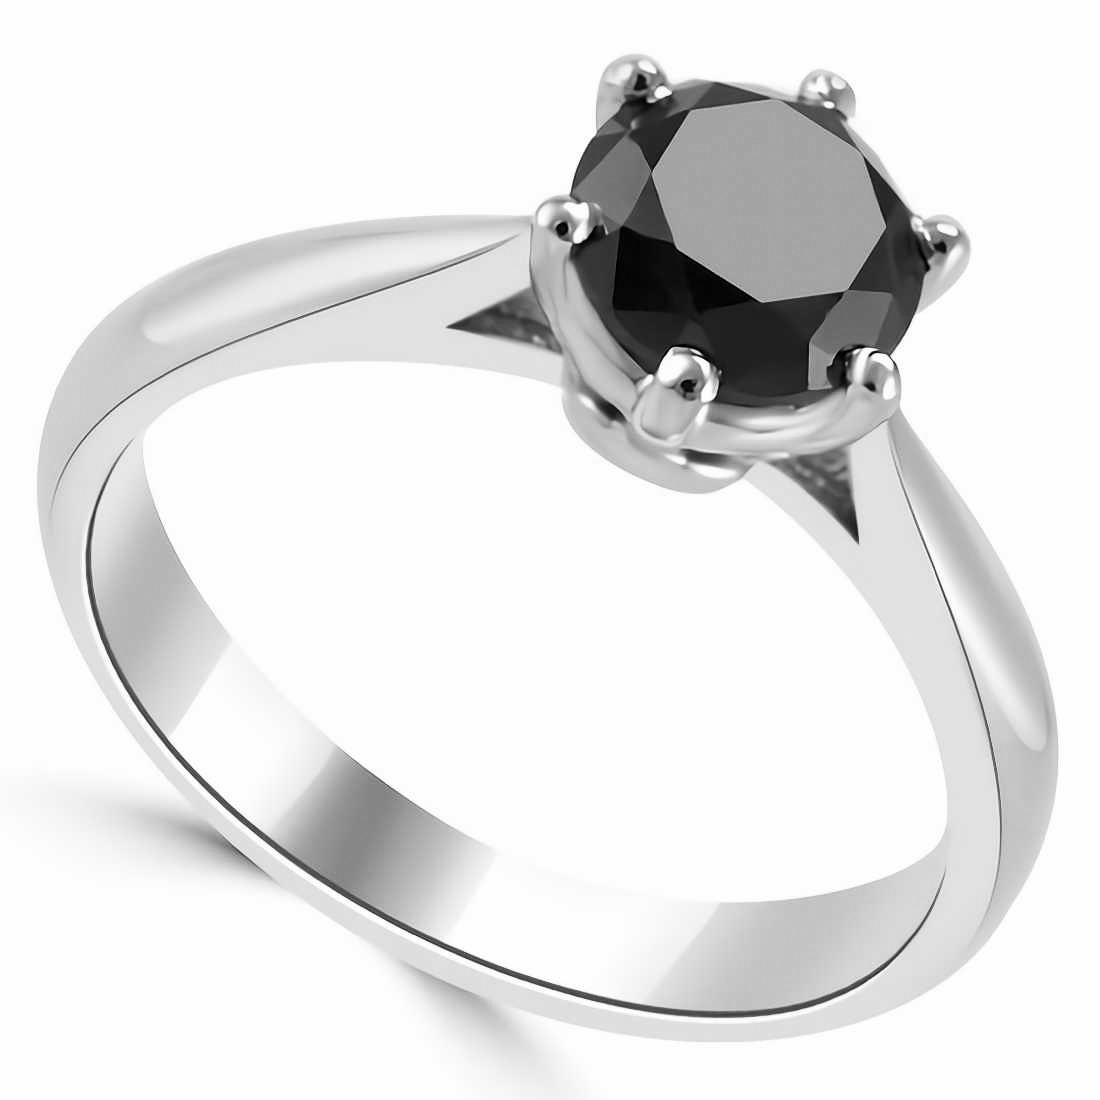 Black Diamond Solitaire 6-Prong Engagement Ring